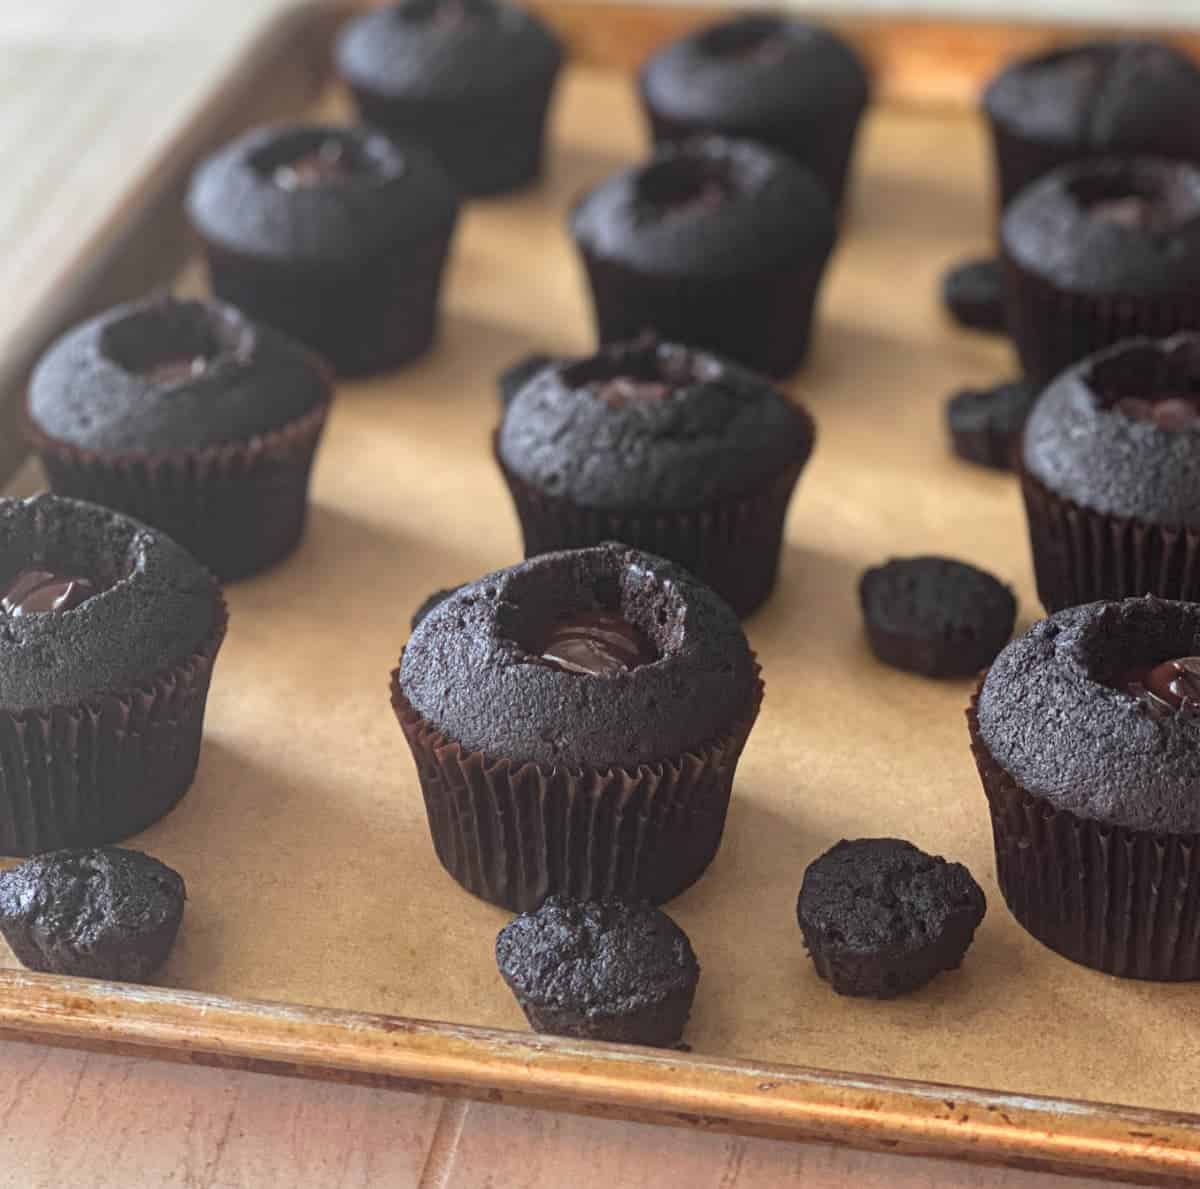 Black Velvet Cupcakes with centers filled with ganache.